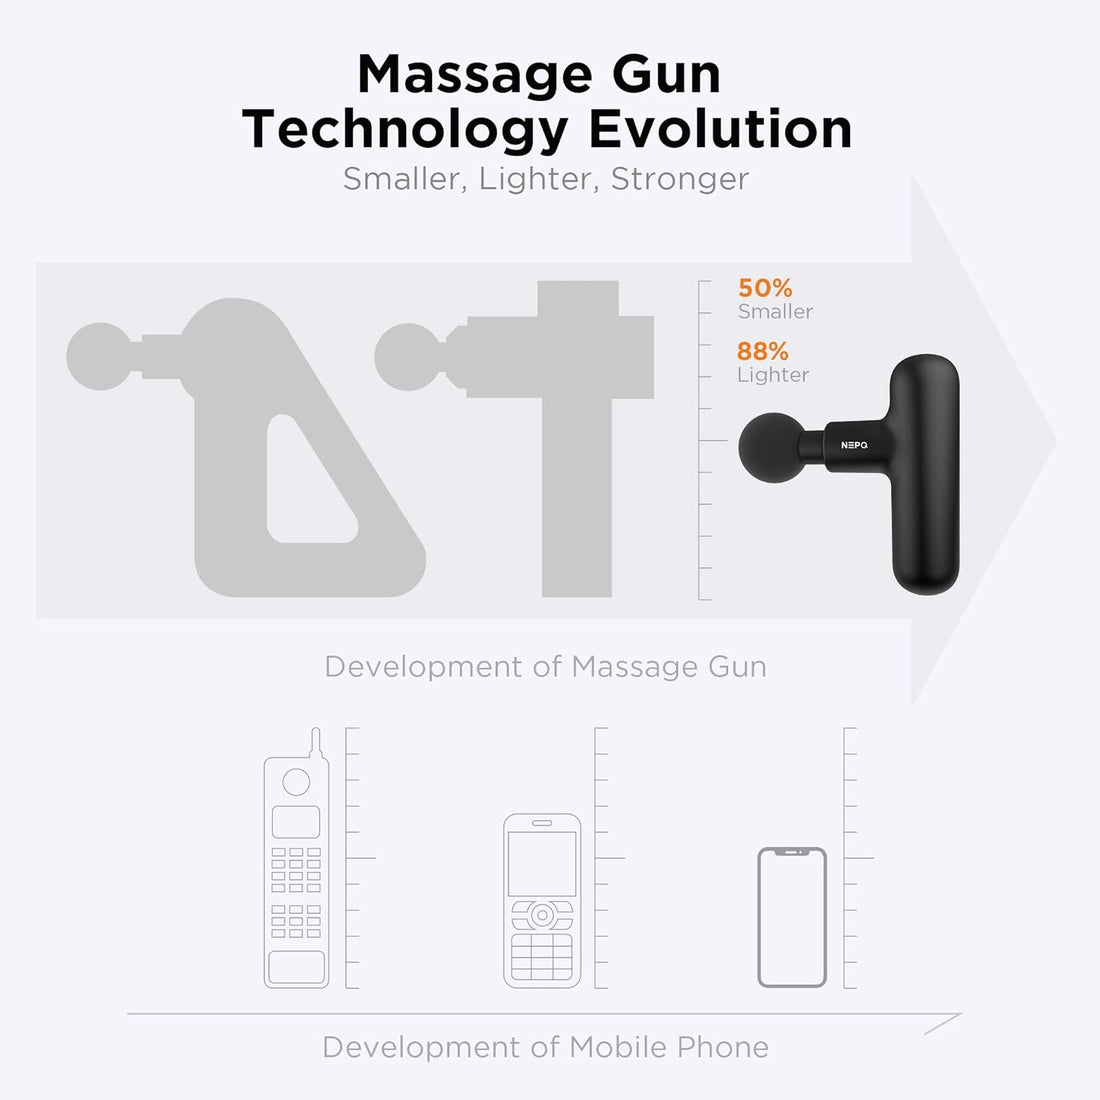 Mini Massage Gun, NEPQ Powerful Fascial Gun Portable Deep Tissue Percussion Muscle Back Head Massager for Pain Relief with 4 Massage Heads 4 Speed High-Intensity Vibration Rechargeable (Black)